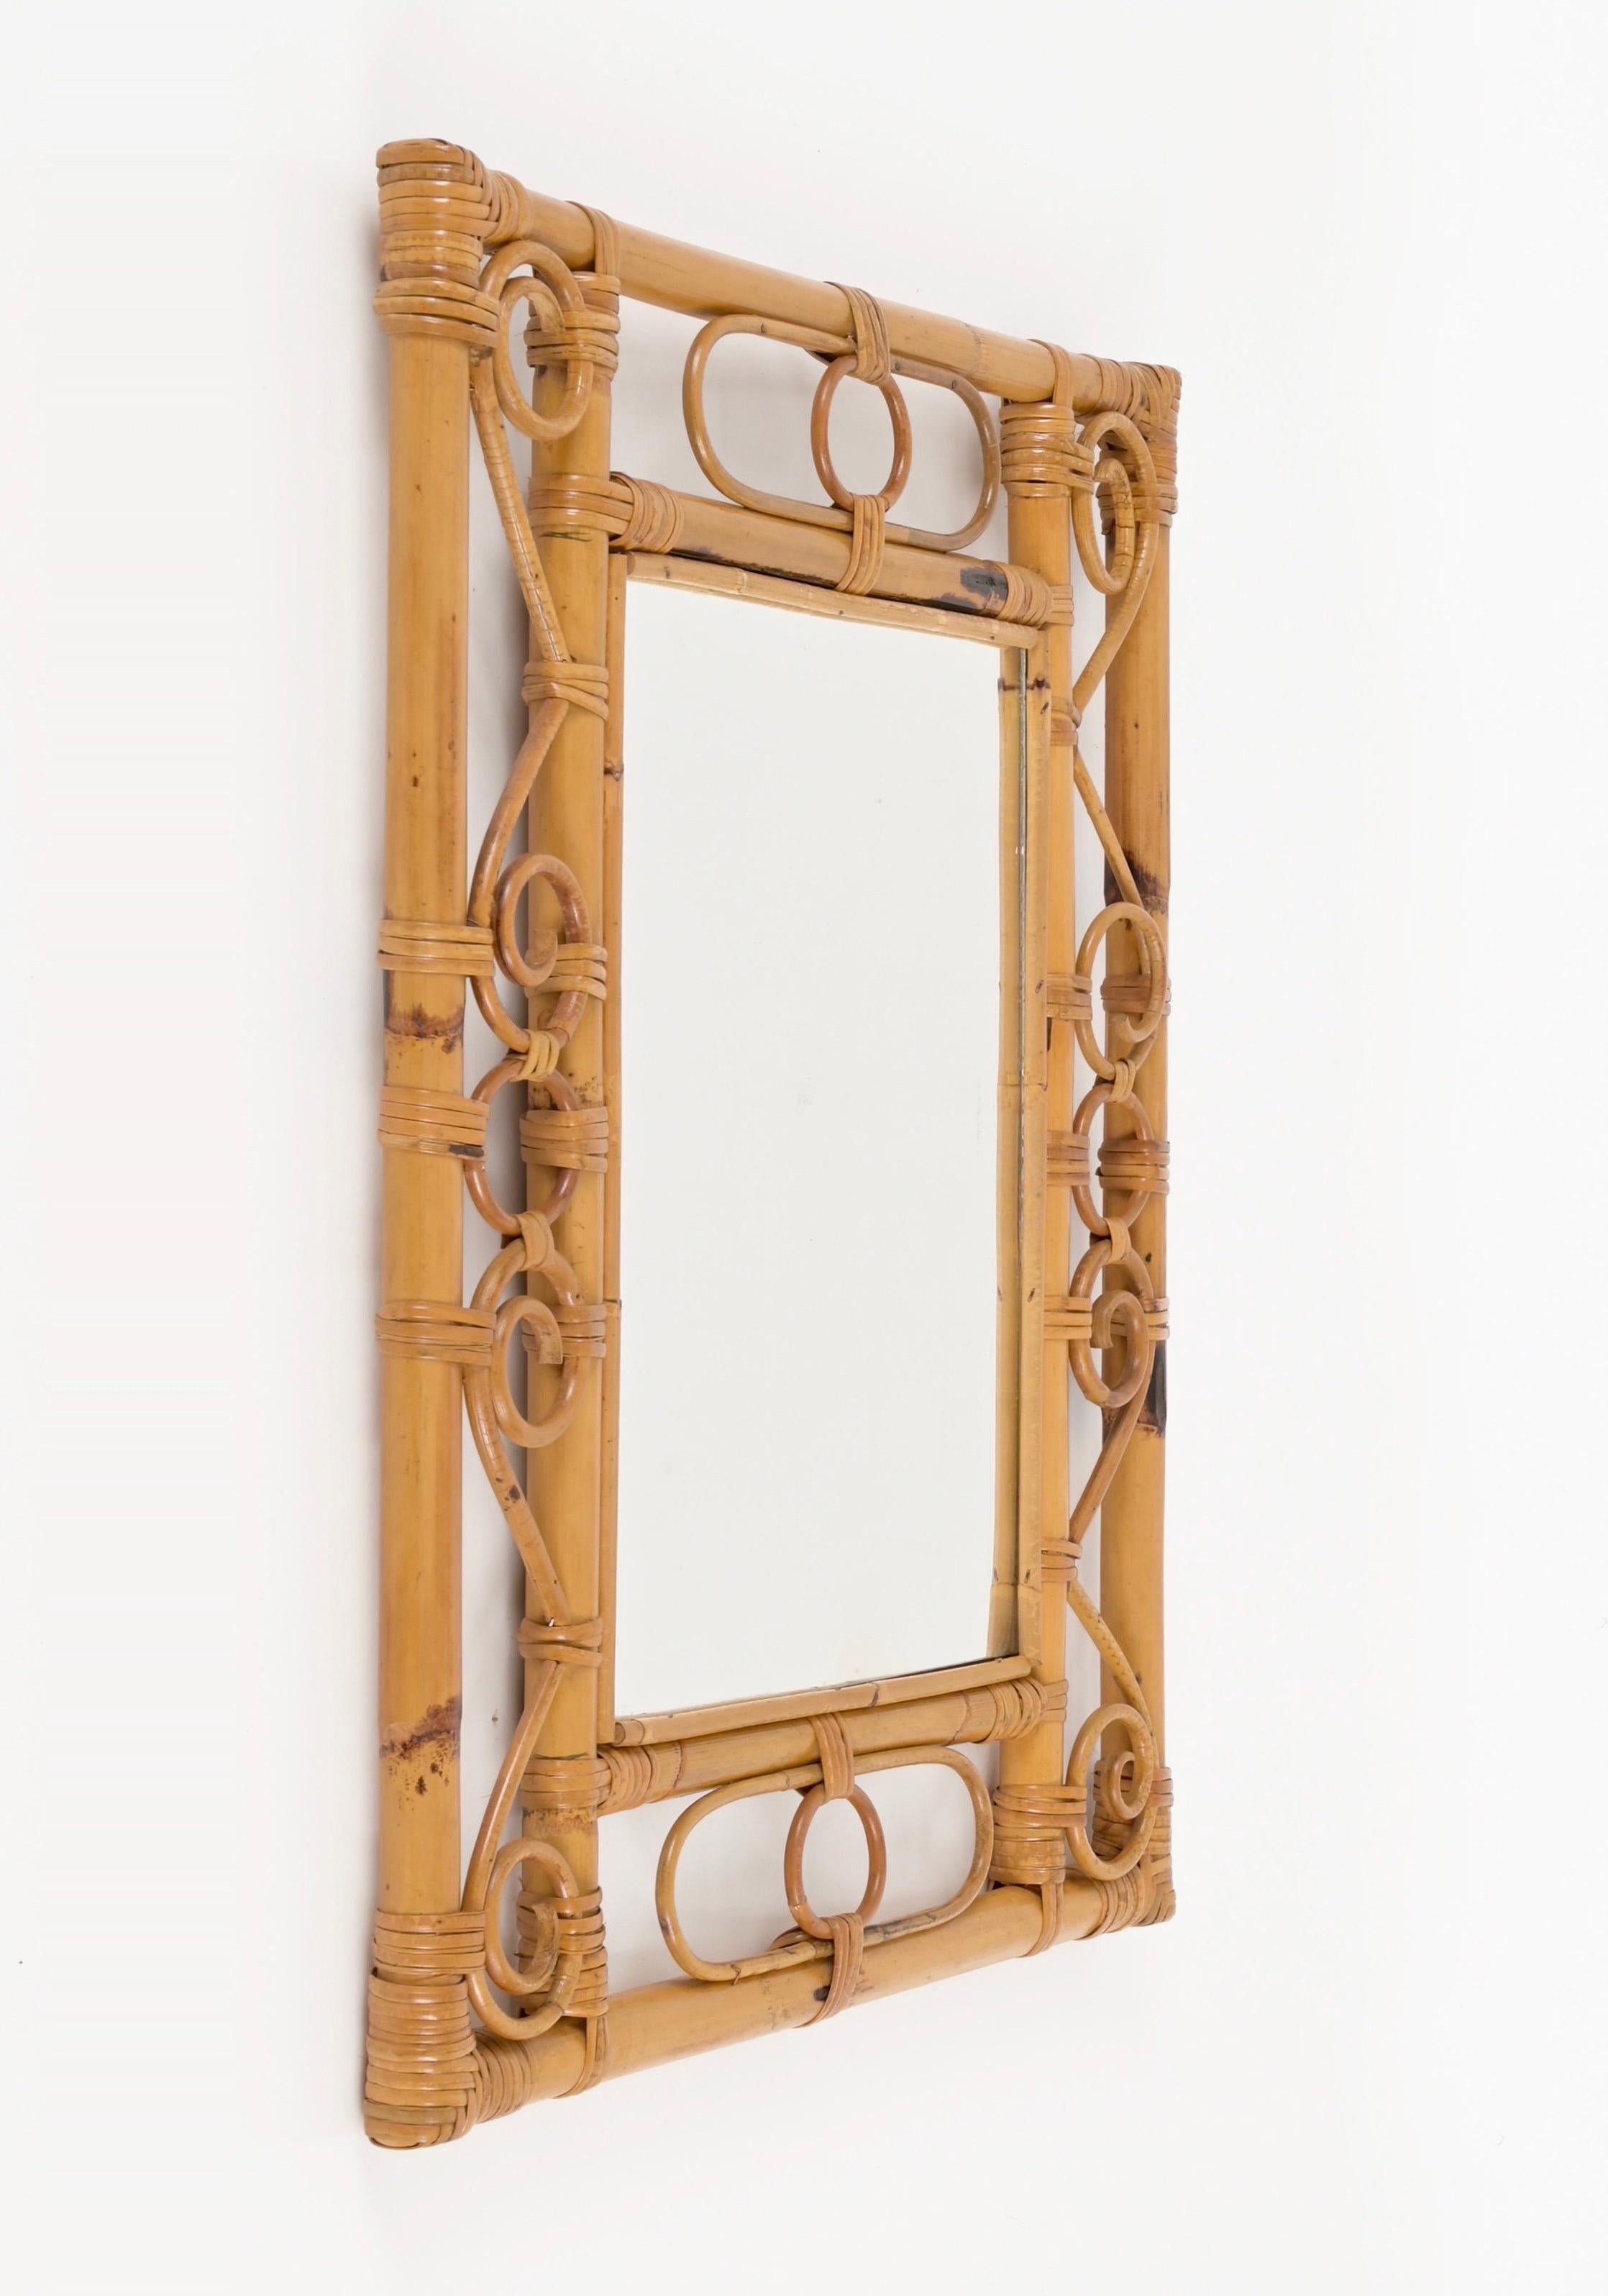 Midcentury French Riviera Bamboo, Rattan, Wicker Rectangular Mirror, Italy 1960s For Sale 4